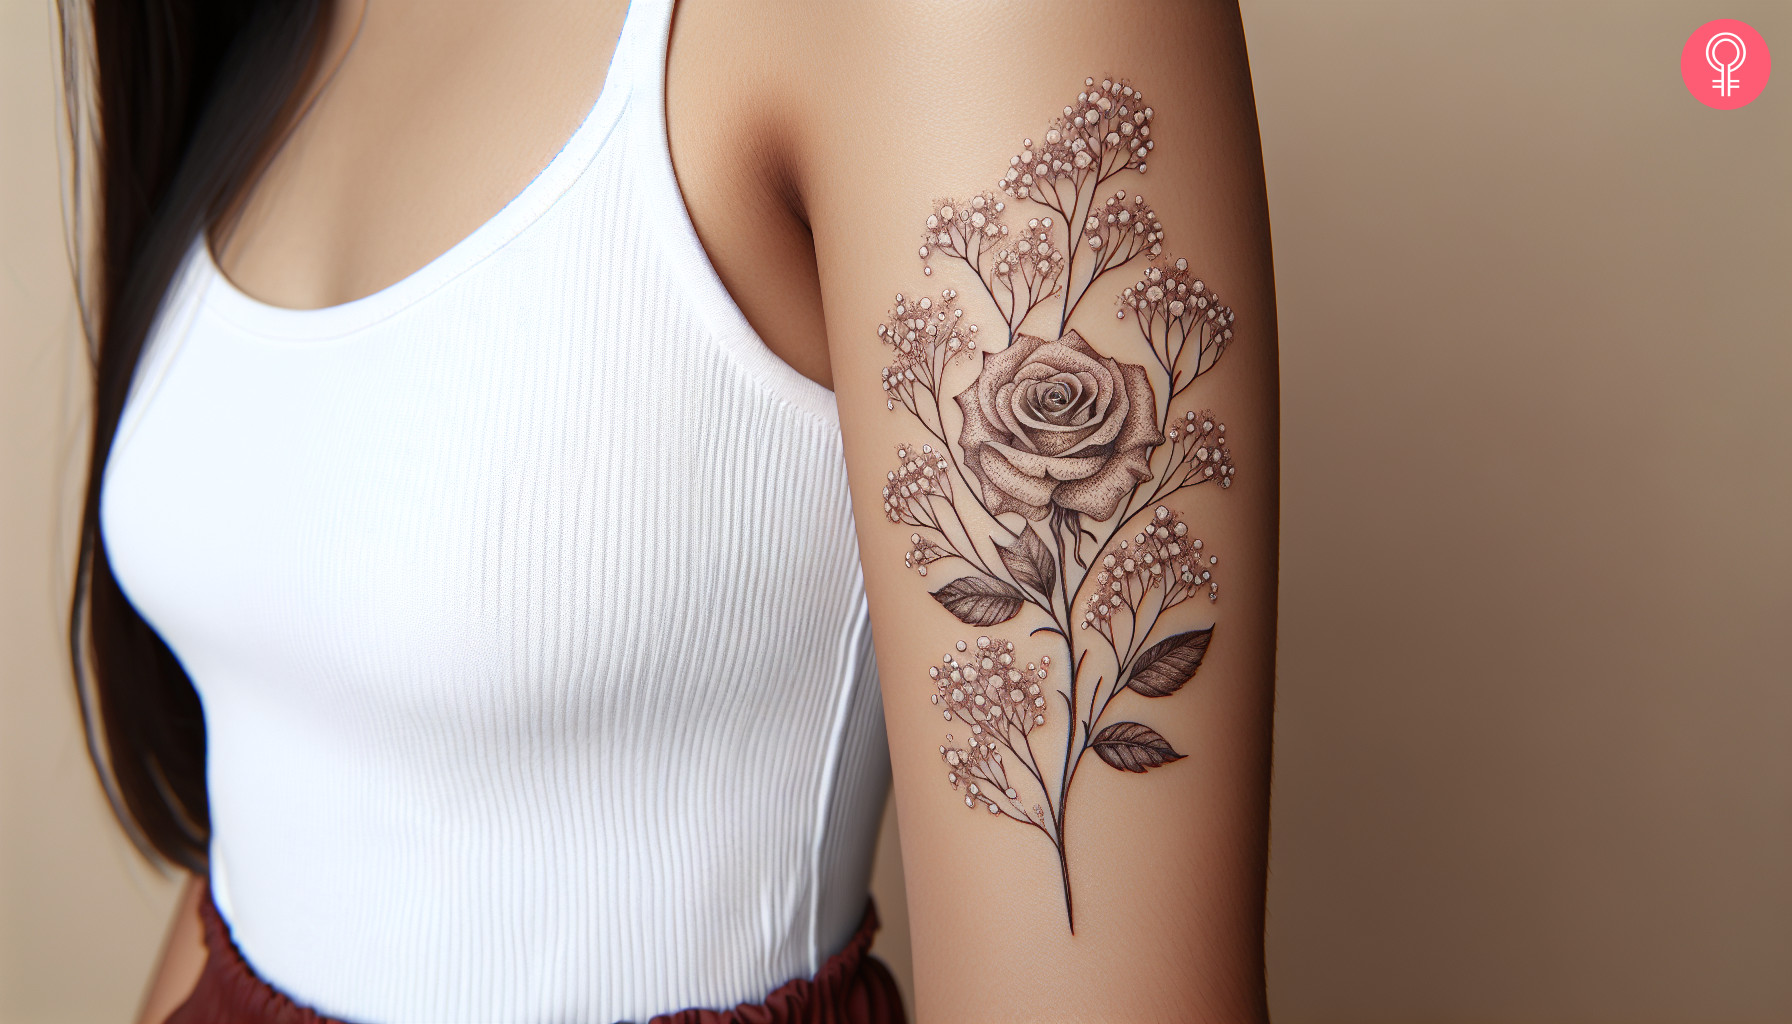 A tattoo on a woman’s upper arm featuring baby’s breath and rose